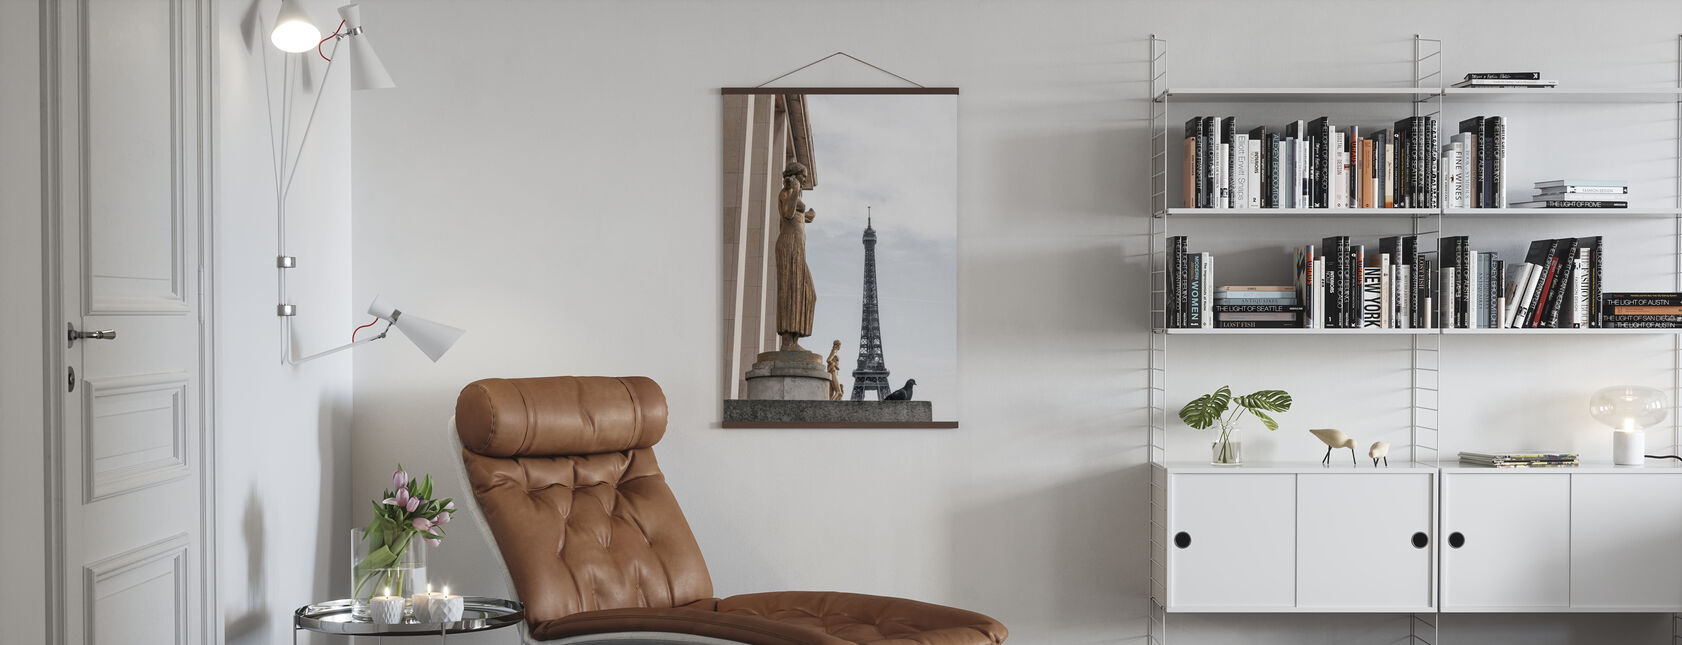 Eiffel Tower with Statues and Pigeon - Poster - Living Room